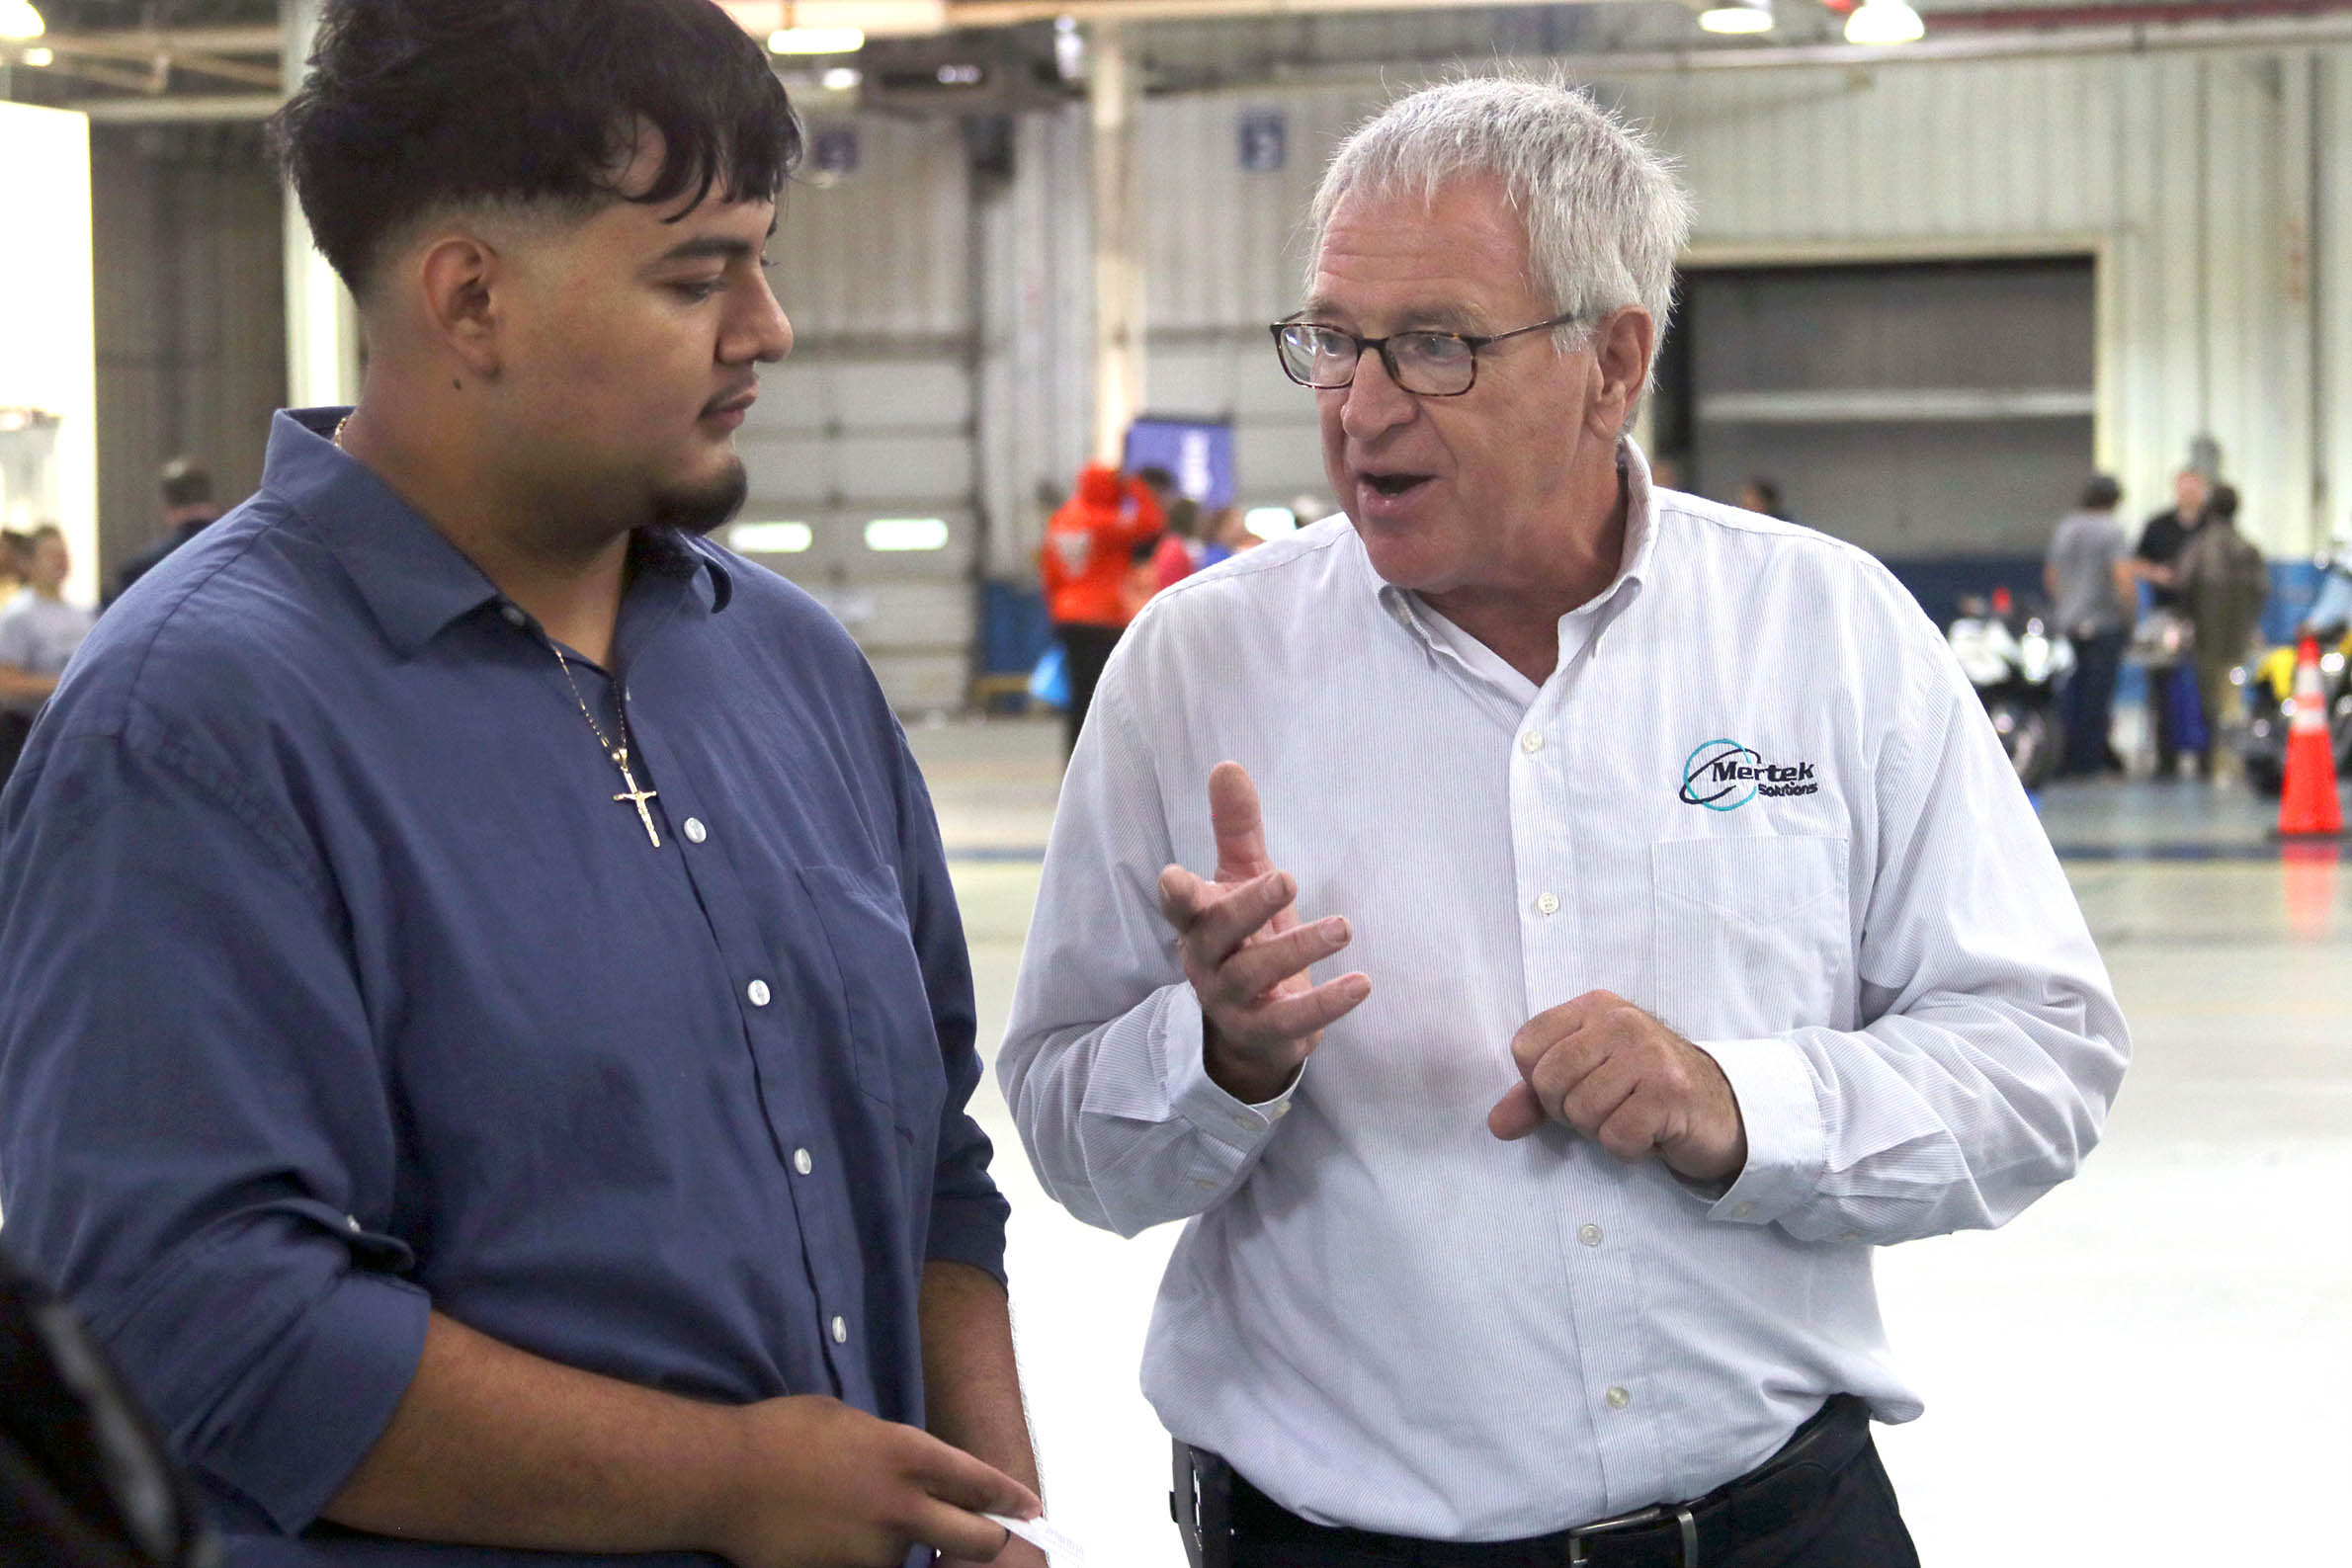 Click to enlarge,  Jerry Pedley from Mertek Solutions, right, was one of the trailblazers for Manufacturing Day when it started more than a decade ago -- inviting students to his robot manufacturing facility in Sanford. Pedley is still involved in Manufacturing Day as an exhibitor and one of the event's biggest supporters. 